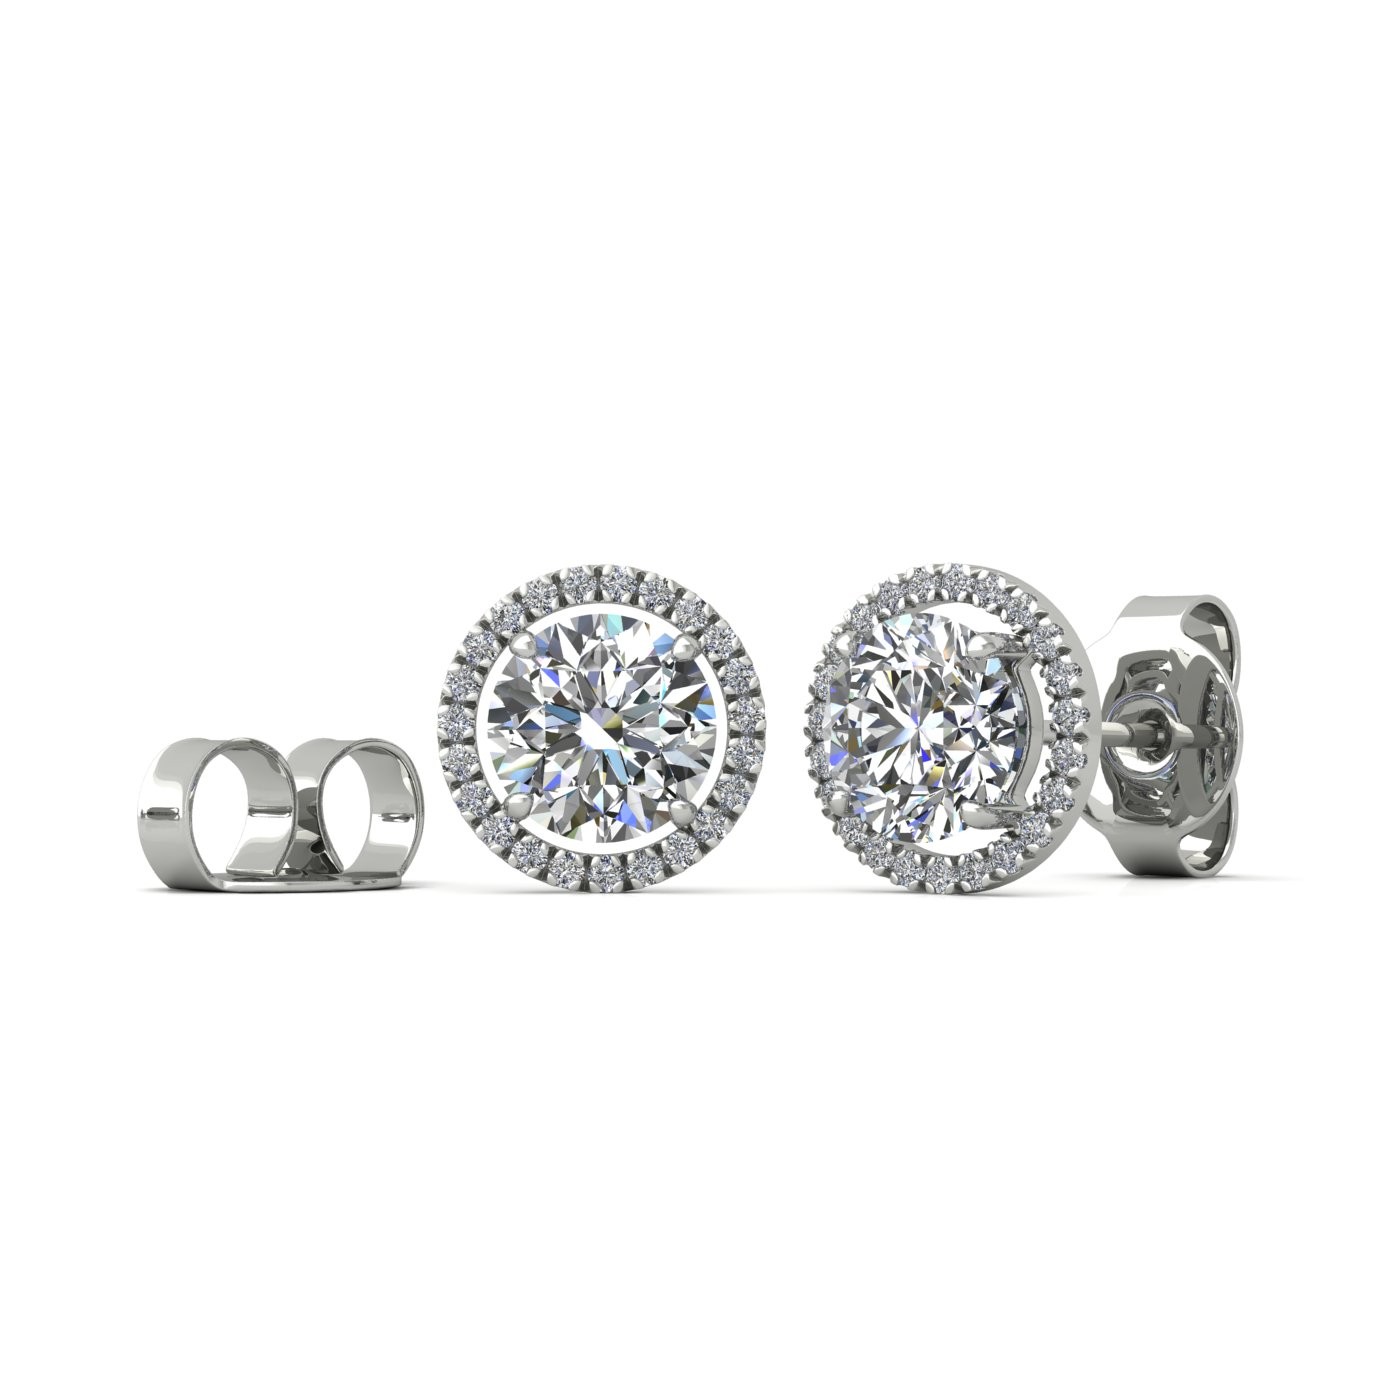 18k white gold 2 ct each (4 tcw) 4 prongs round brilliant cut halo diamond earring studs Photos & images